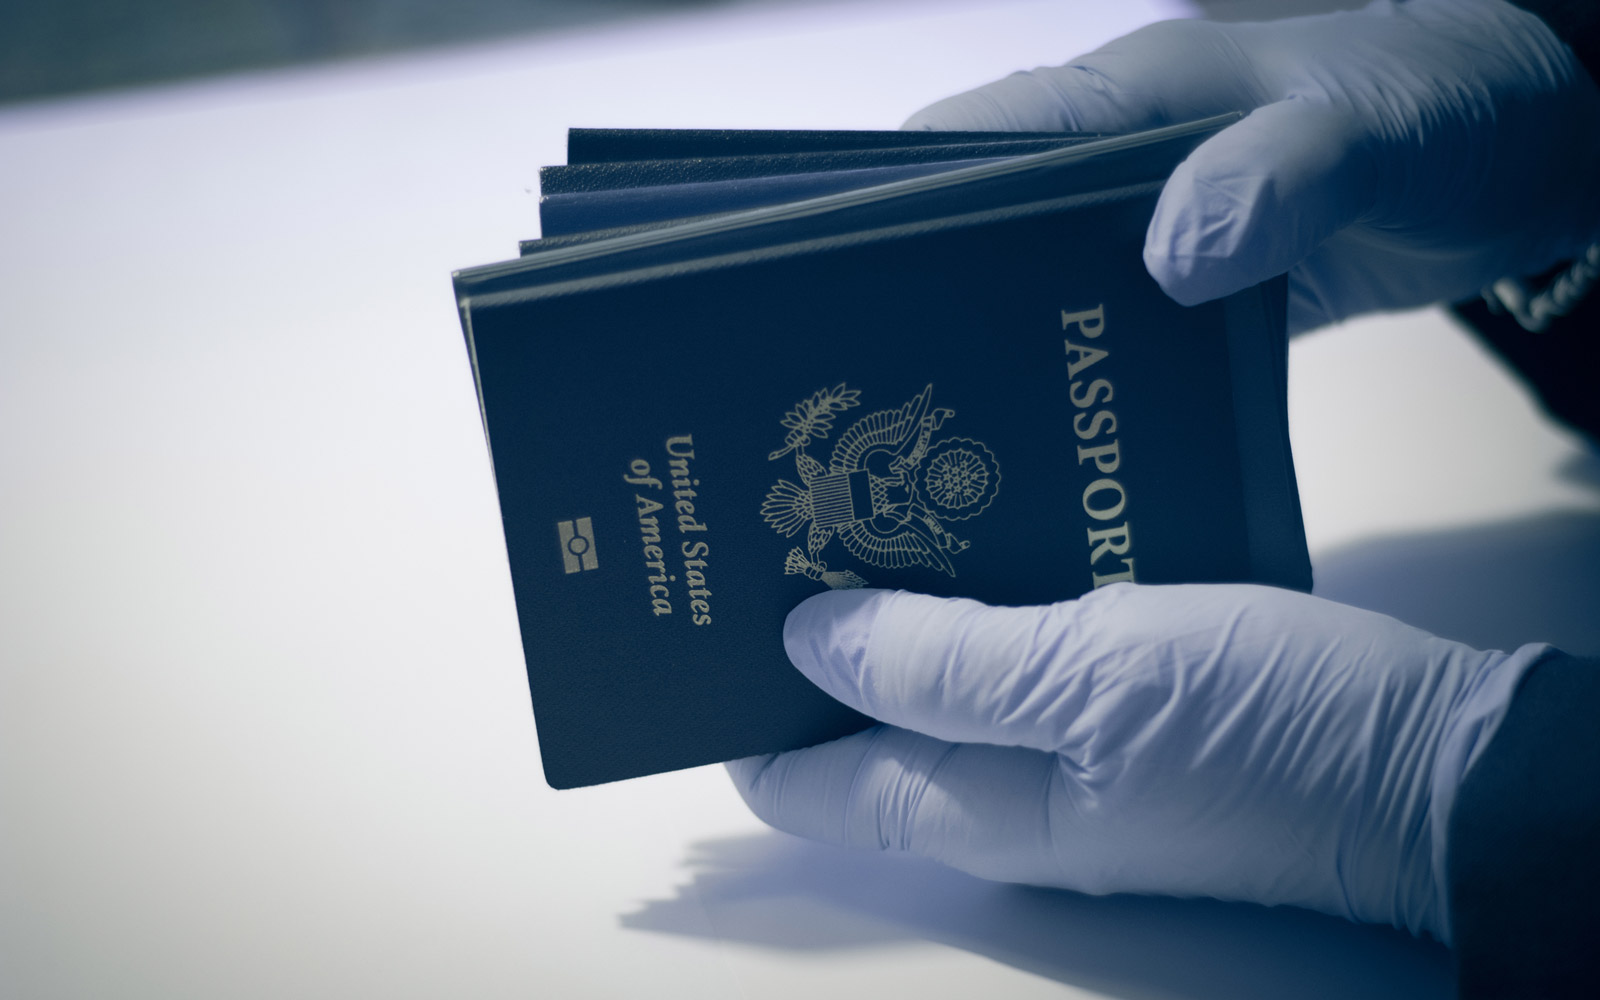 Getting a Passport Is About to Become More Expensive. Here's How to Avoid the Extra Fees